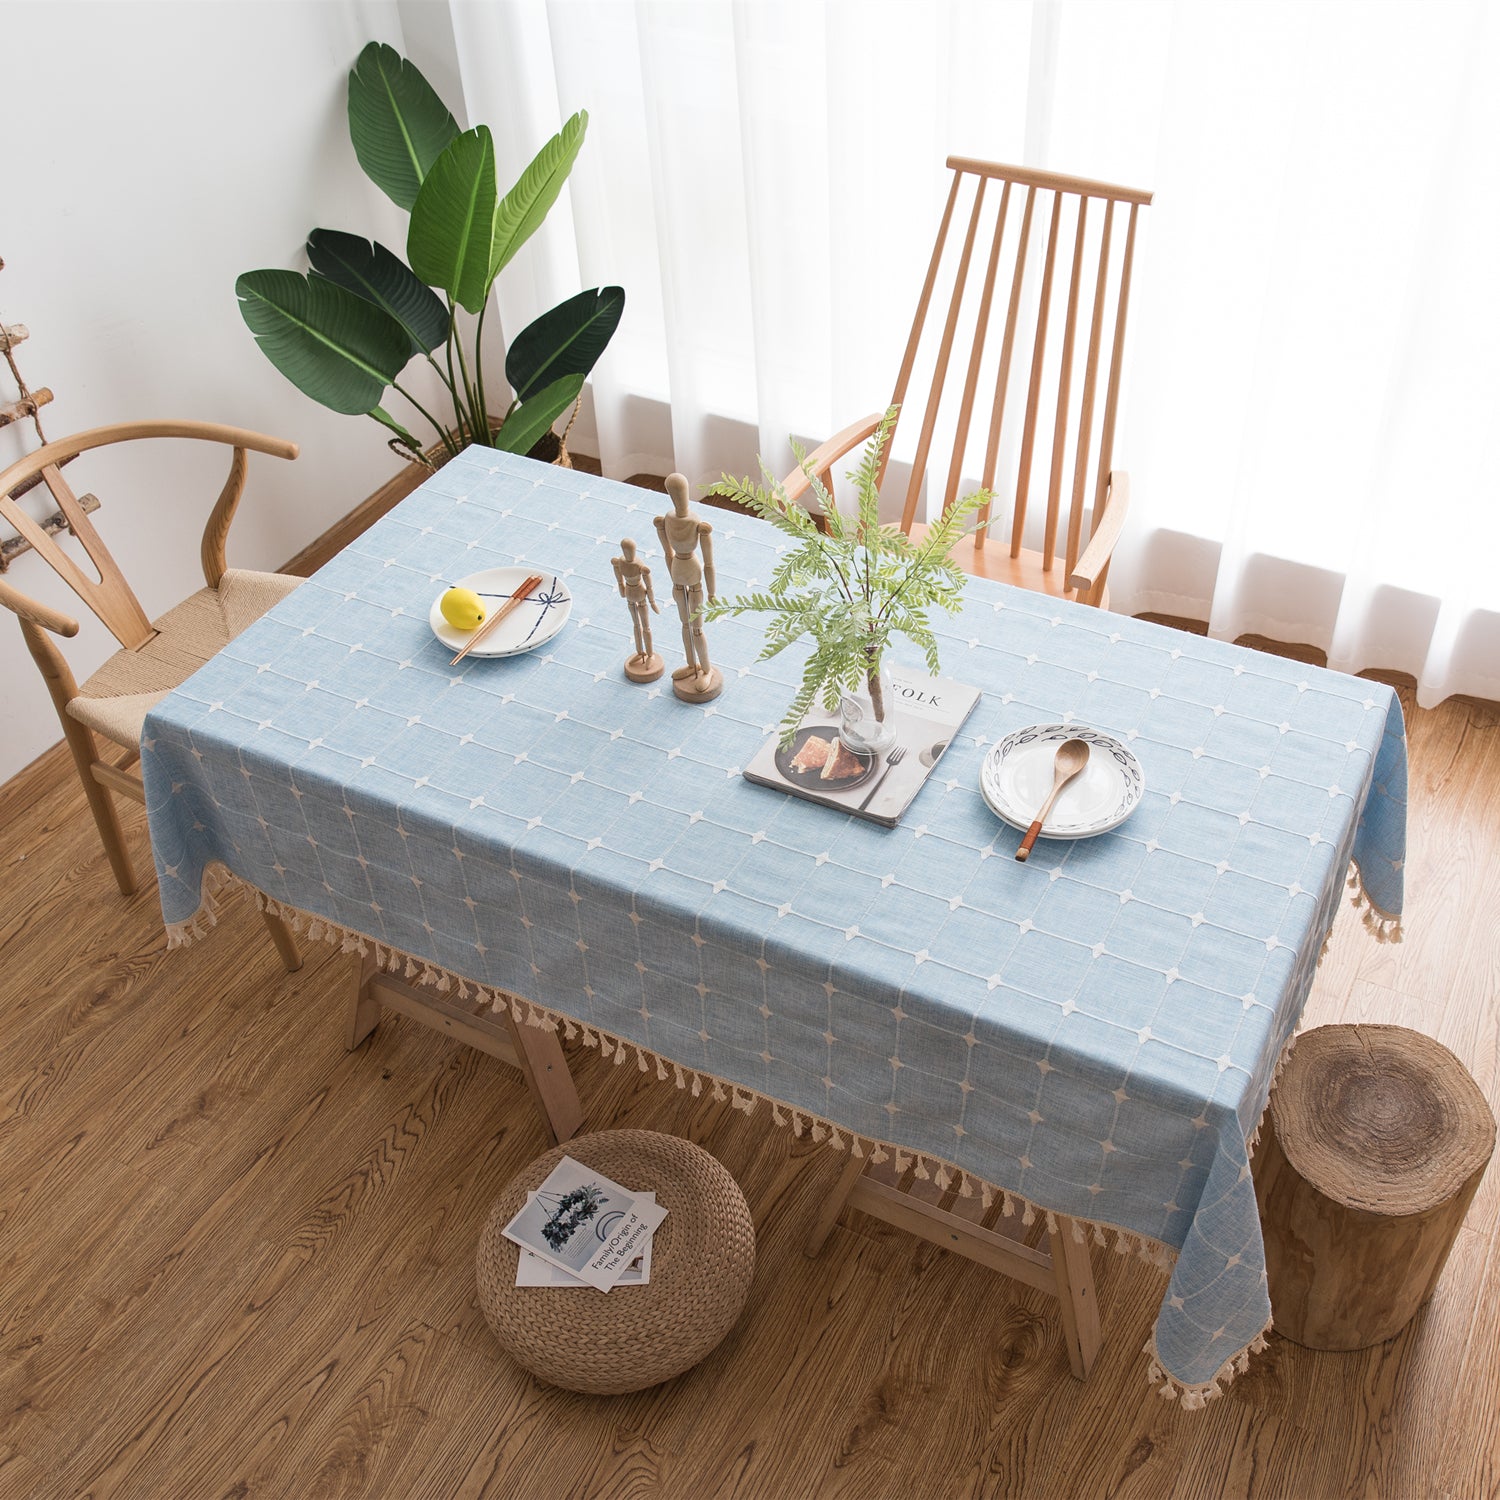 Cotton Linen Tablecloth with Embroidered Rectangular Japan Style